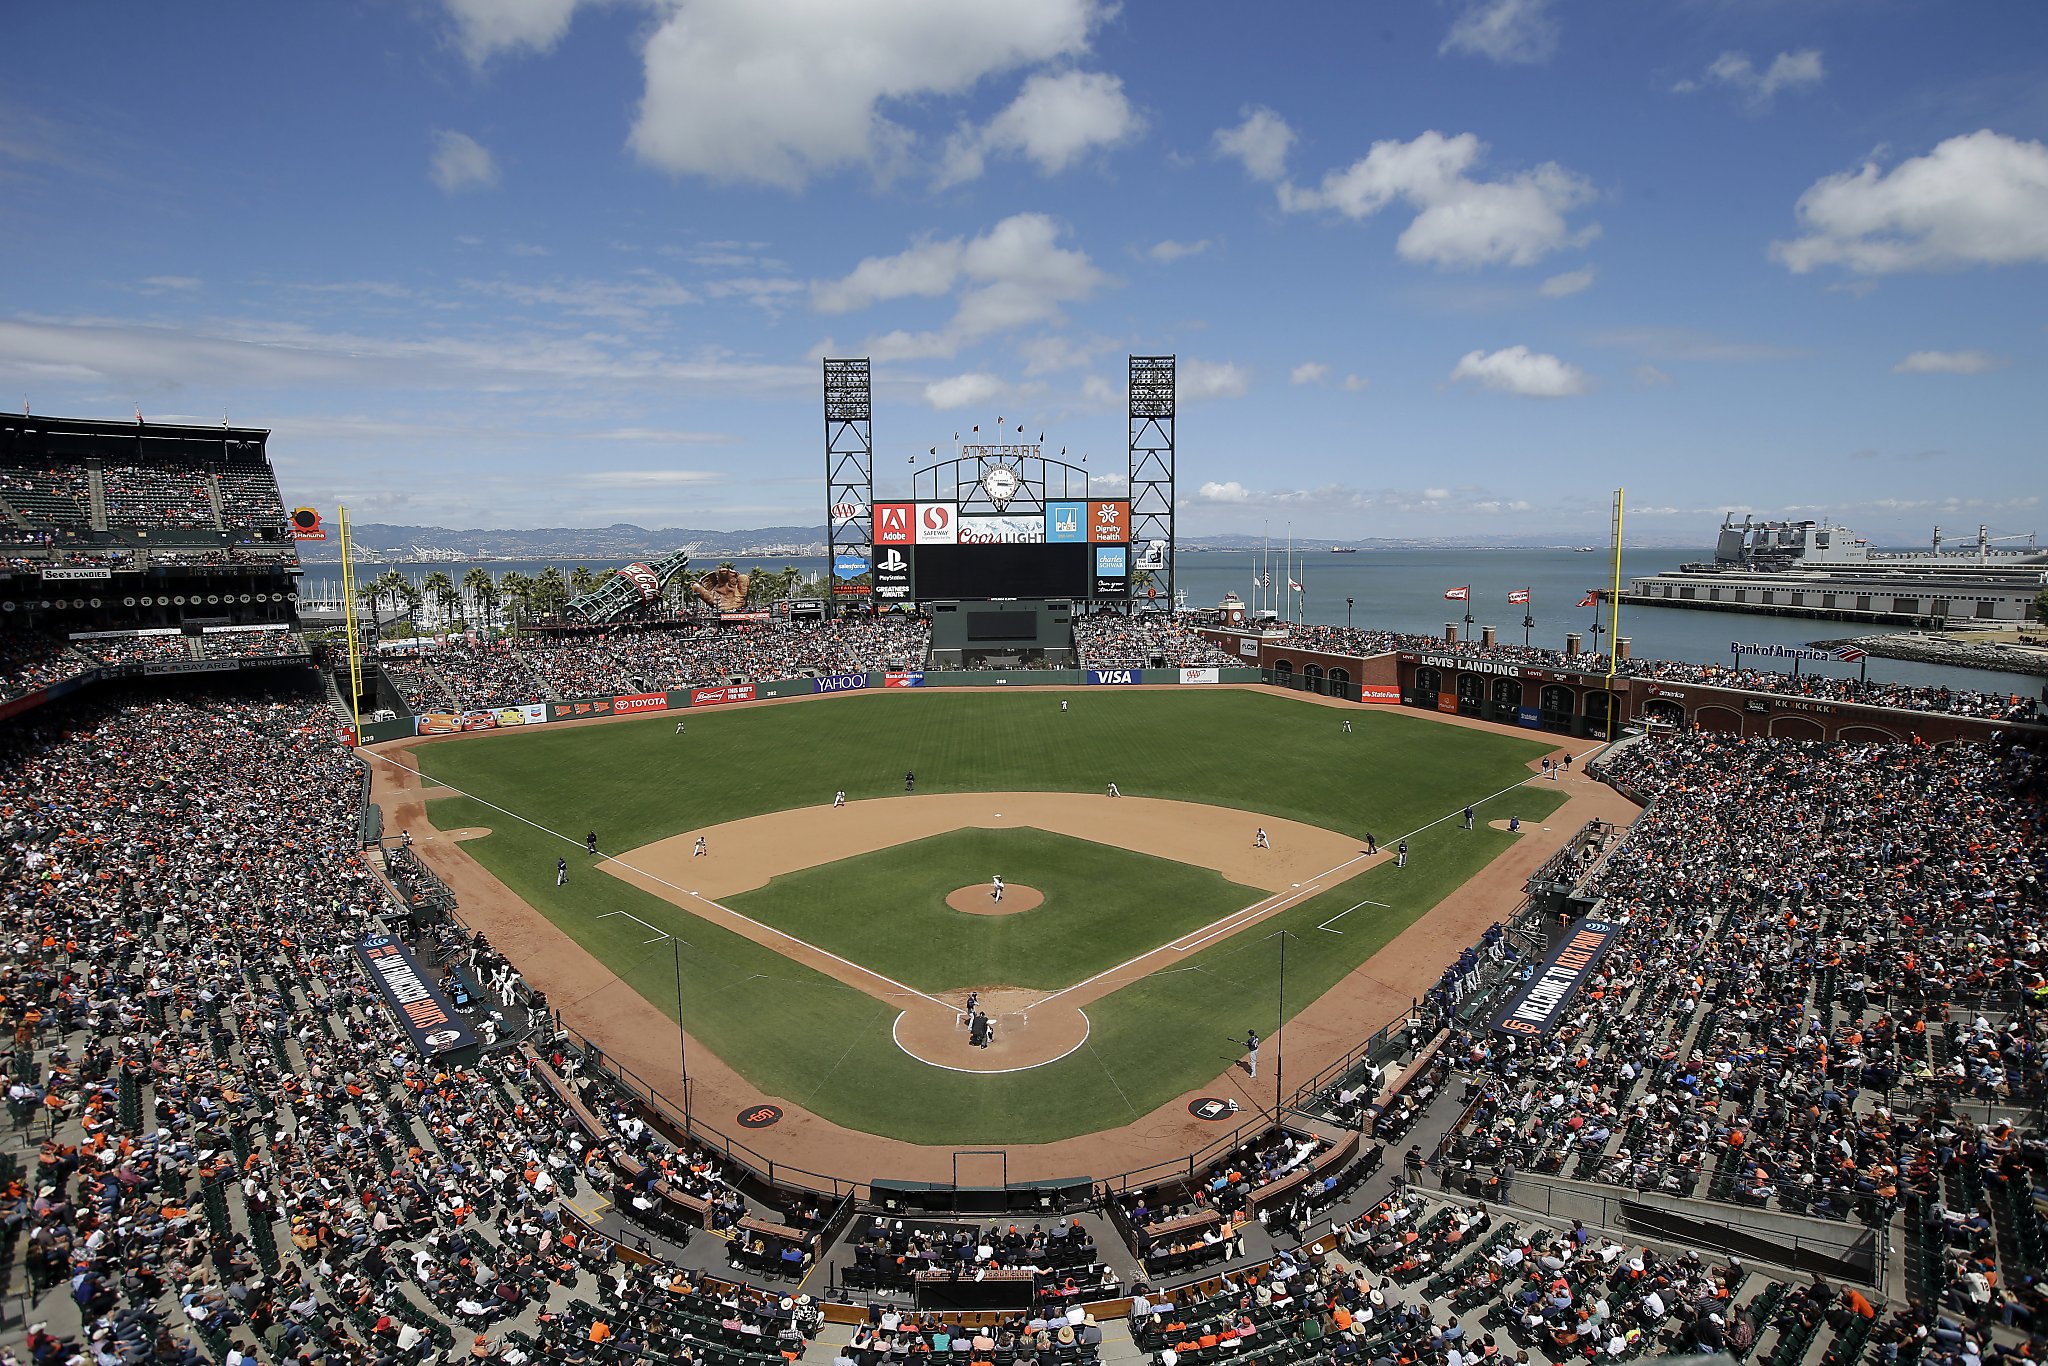 Raiders playing in Oracle Park remains a possibility